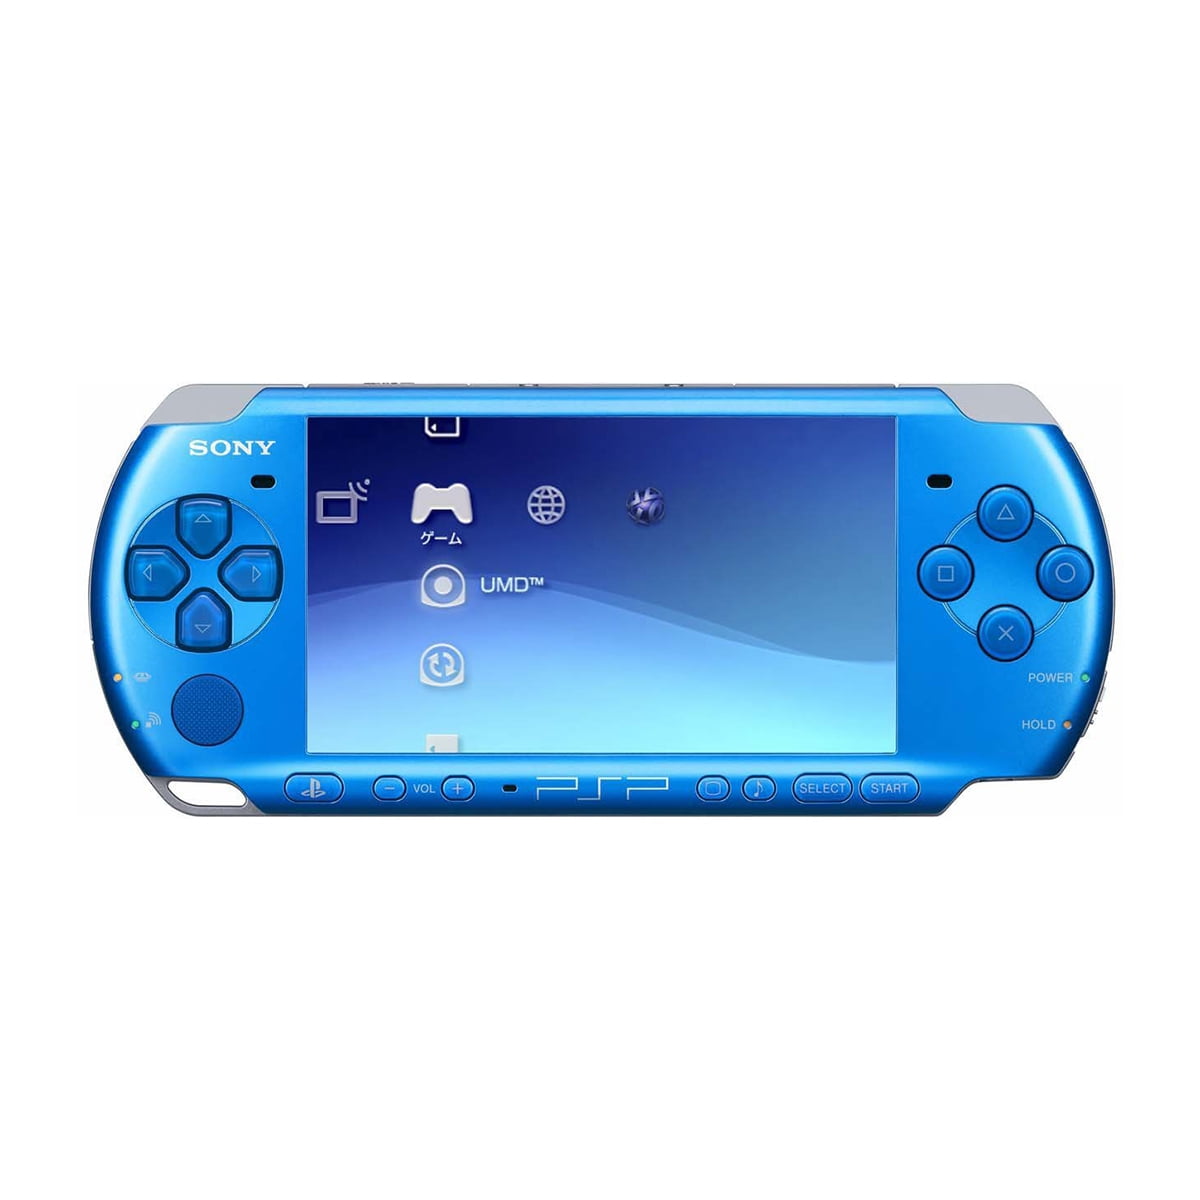 Sony PlayStation Portable (PSP) 3000 Series Handheld Gaming Console System  